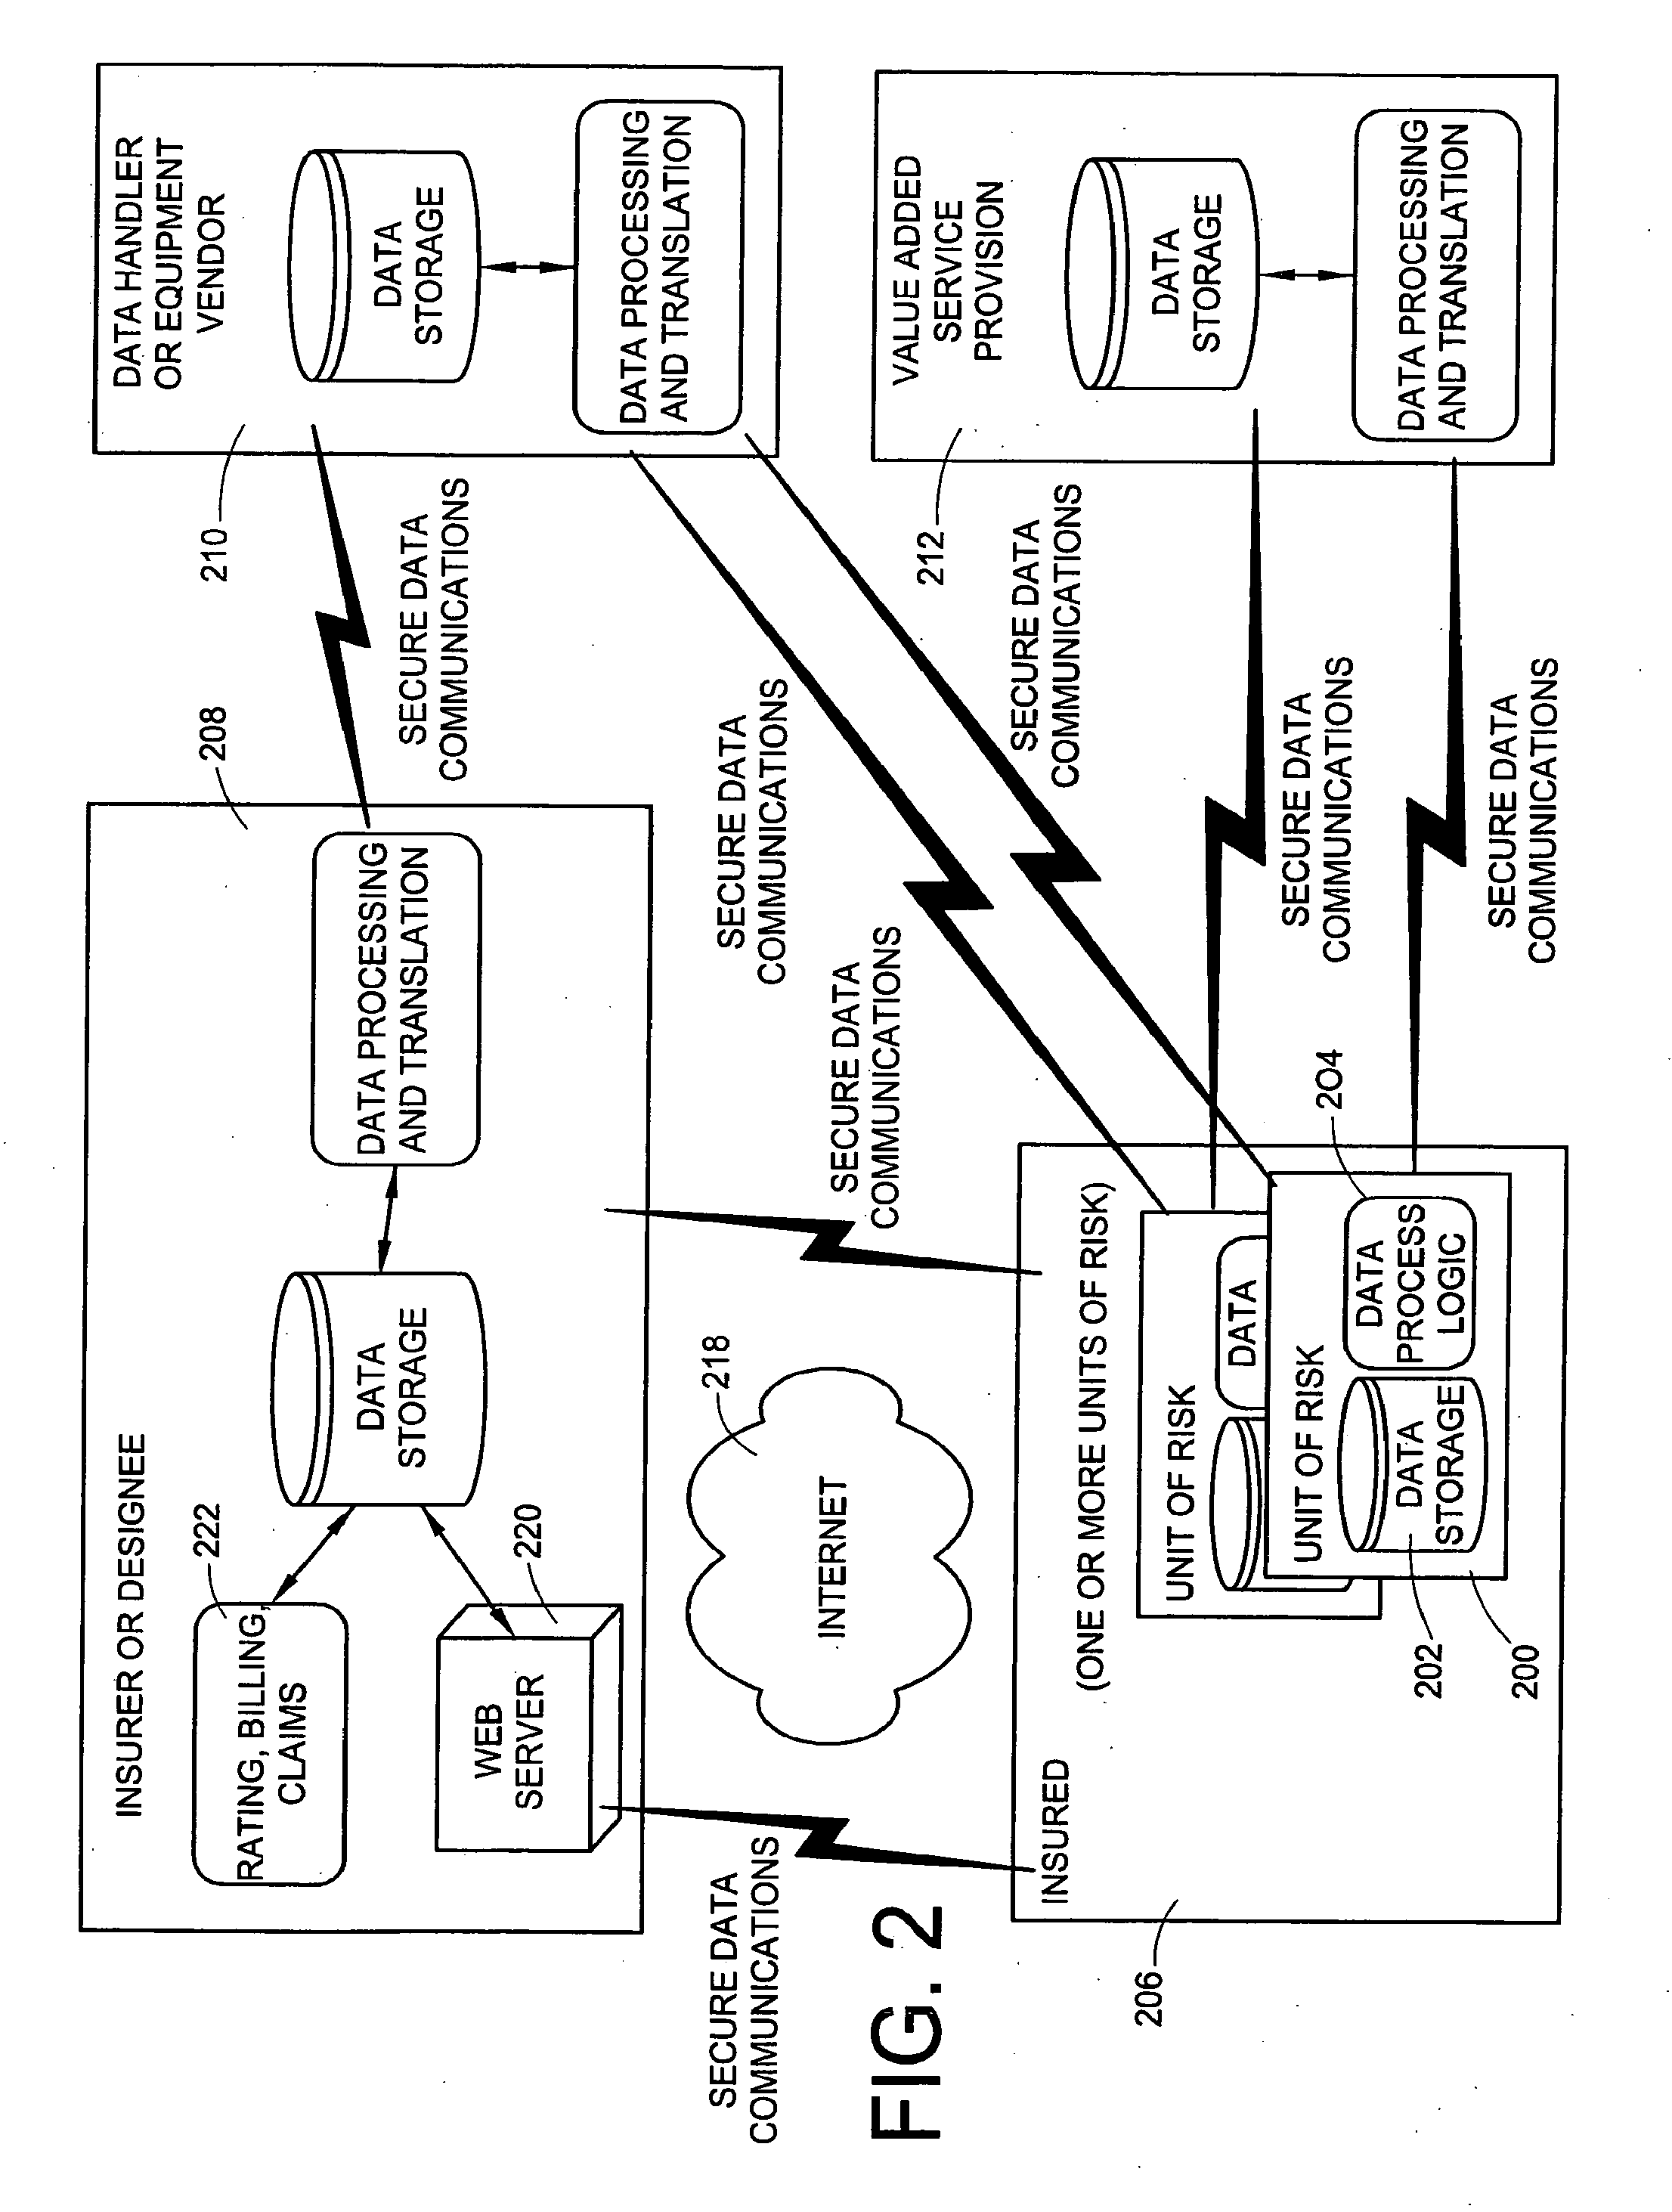 Monitoring system for determining and communicating a cost of insurance